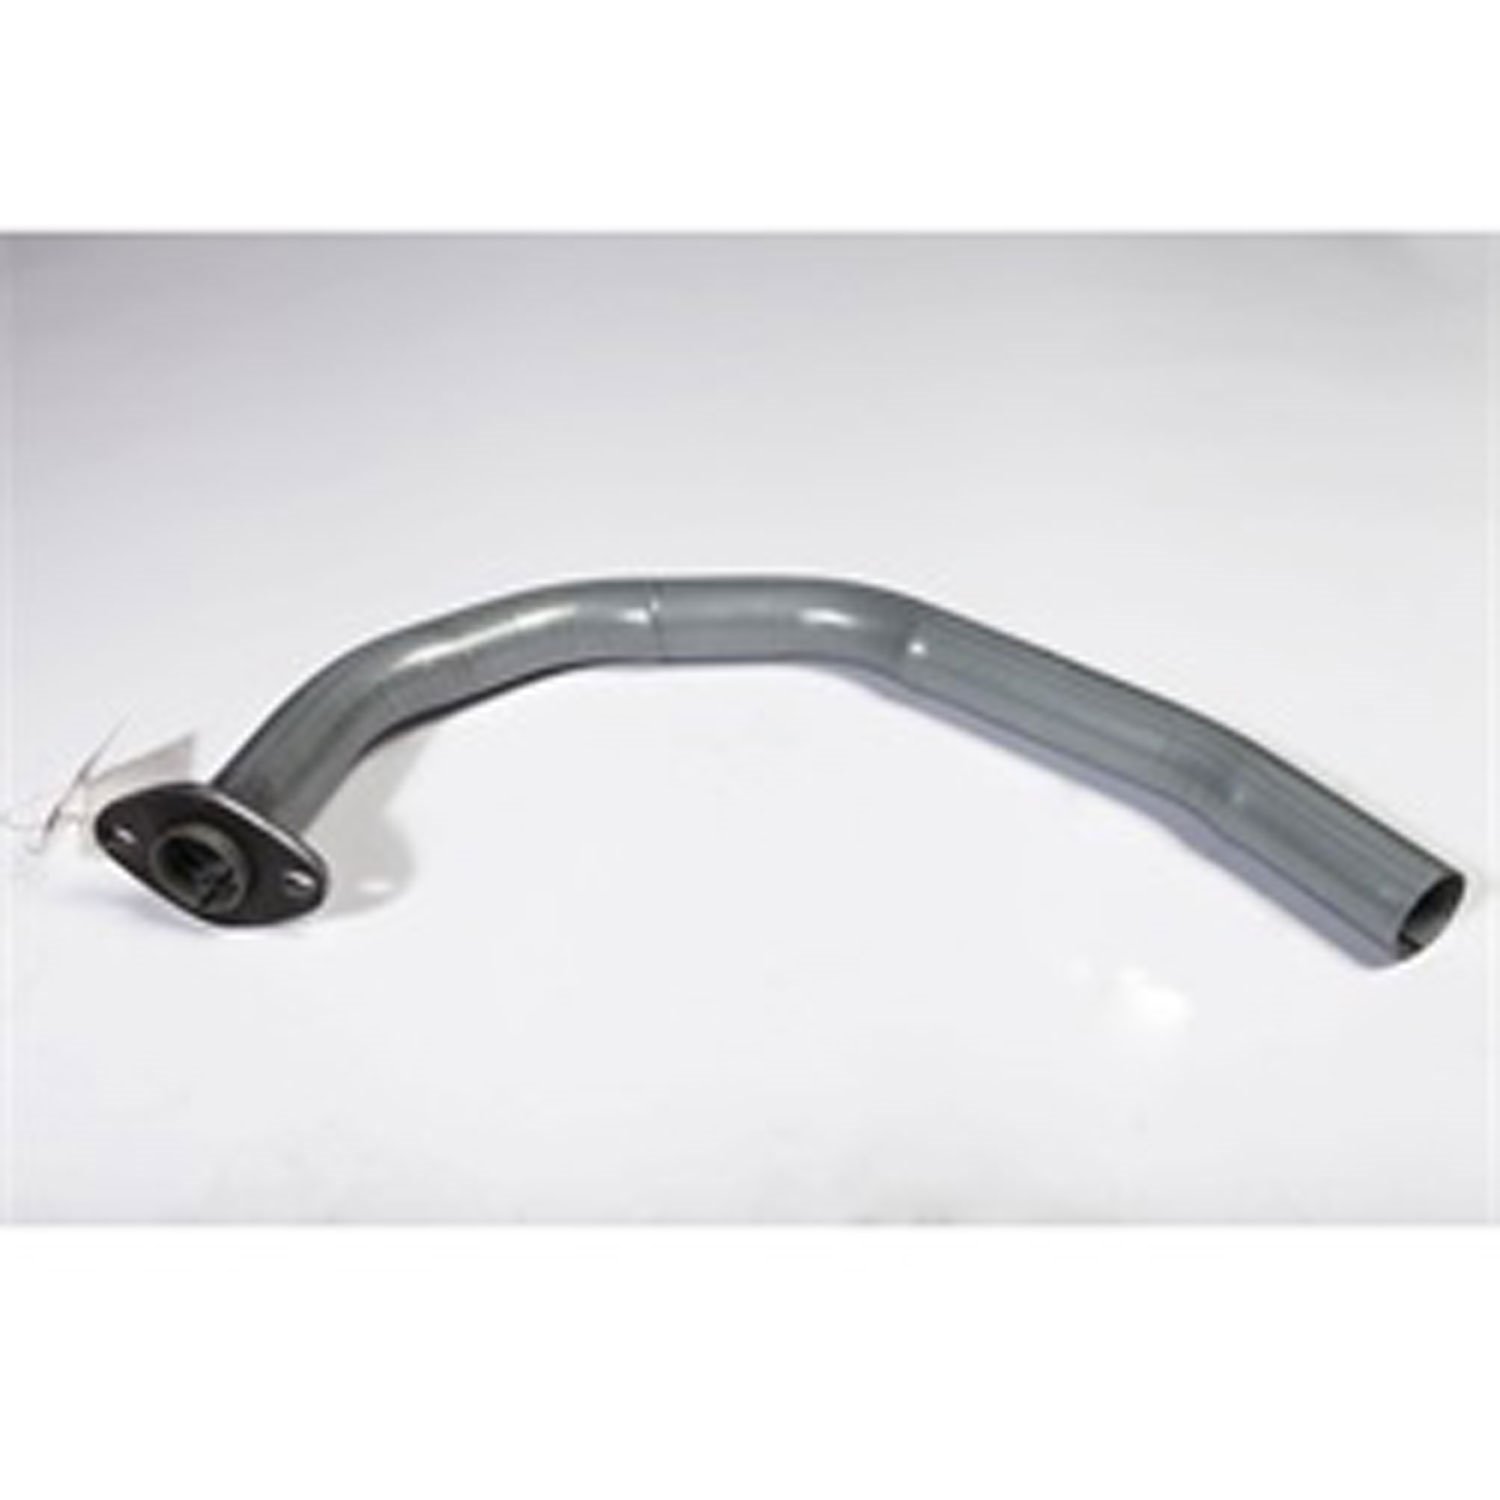 This exhaust head pipe from Omix-ADA fits 45-71 Willys and Jeep models with a 134 cubic inch engine.